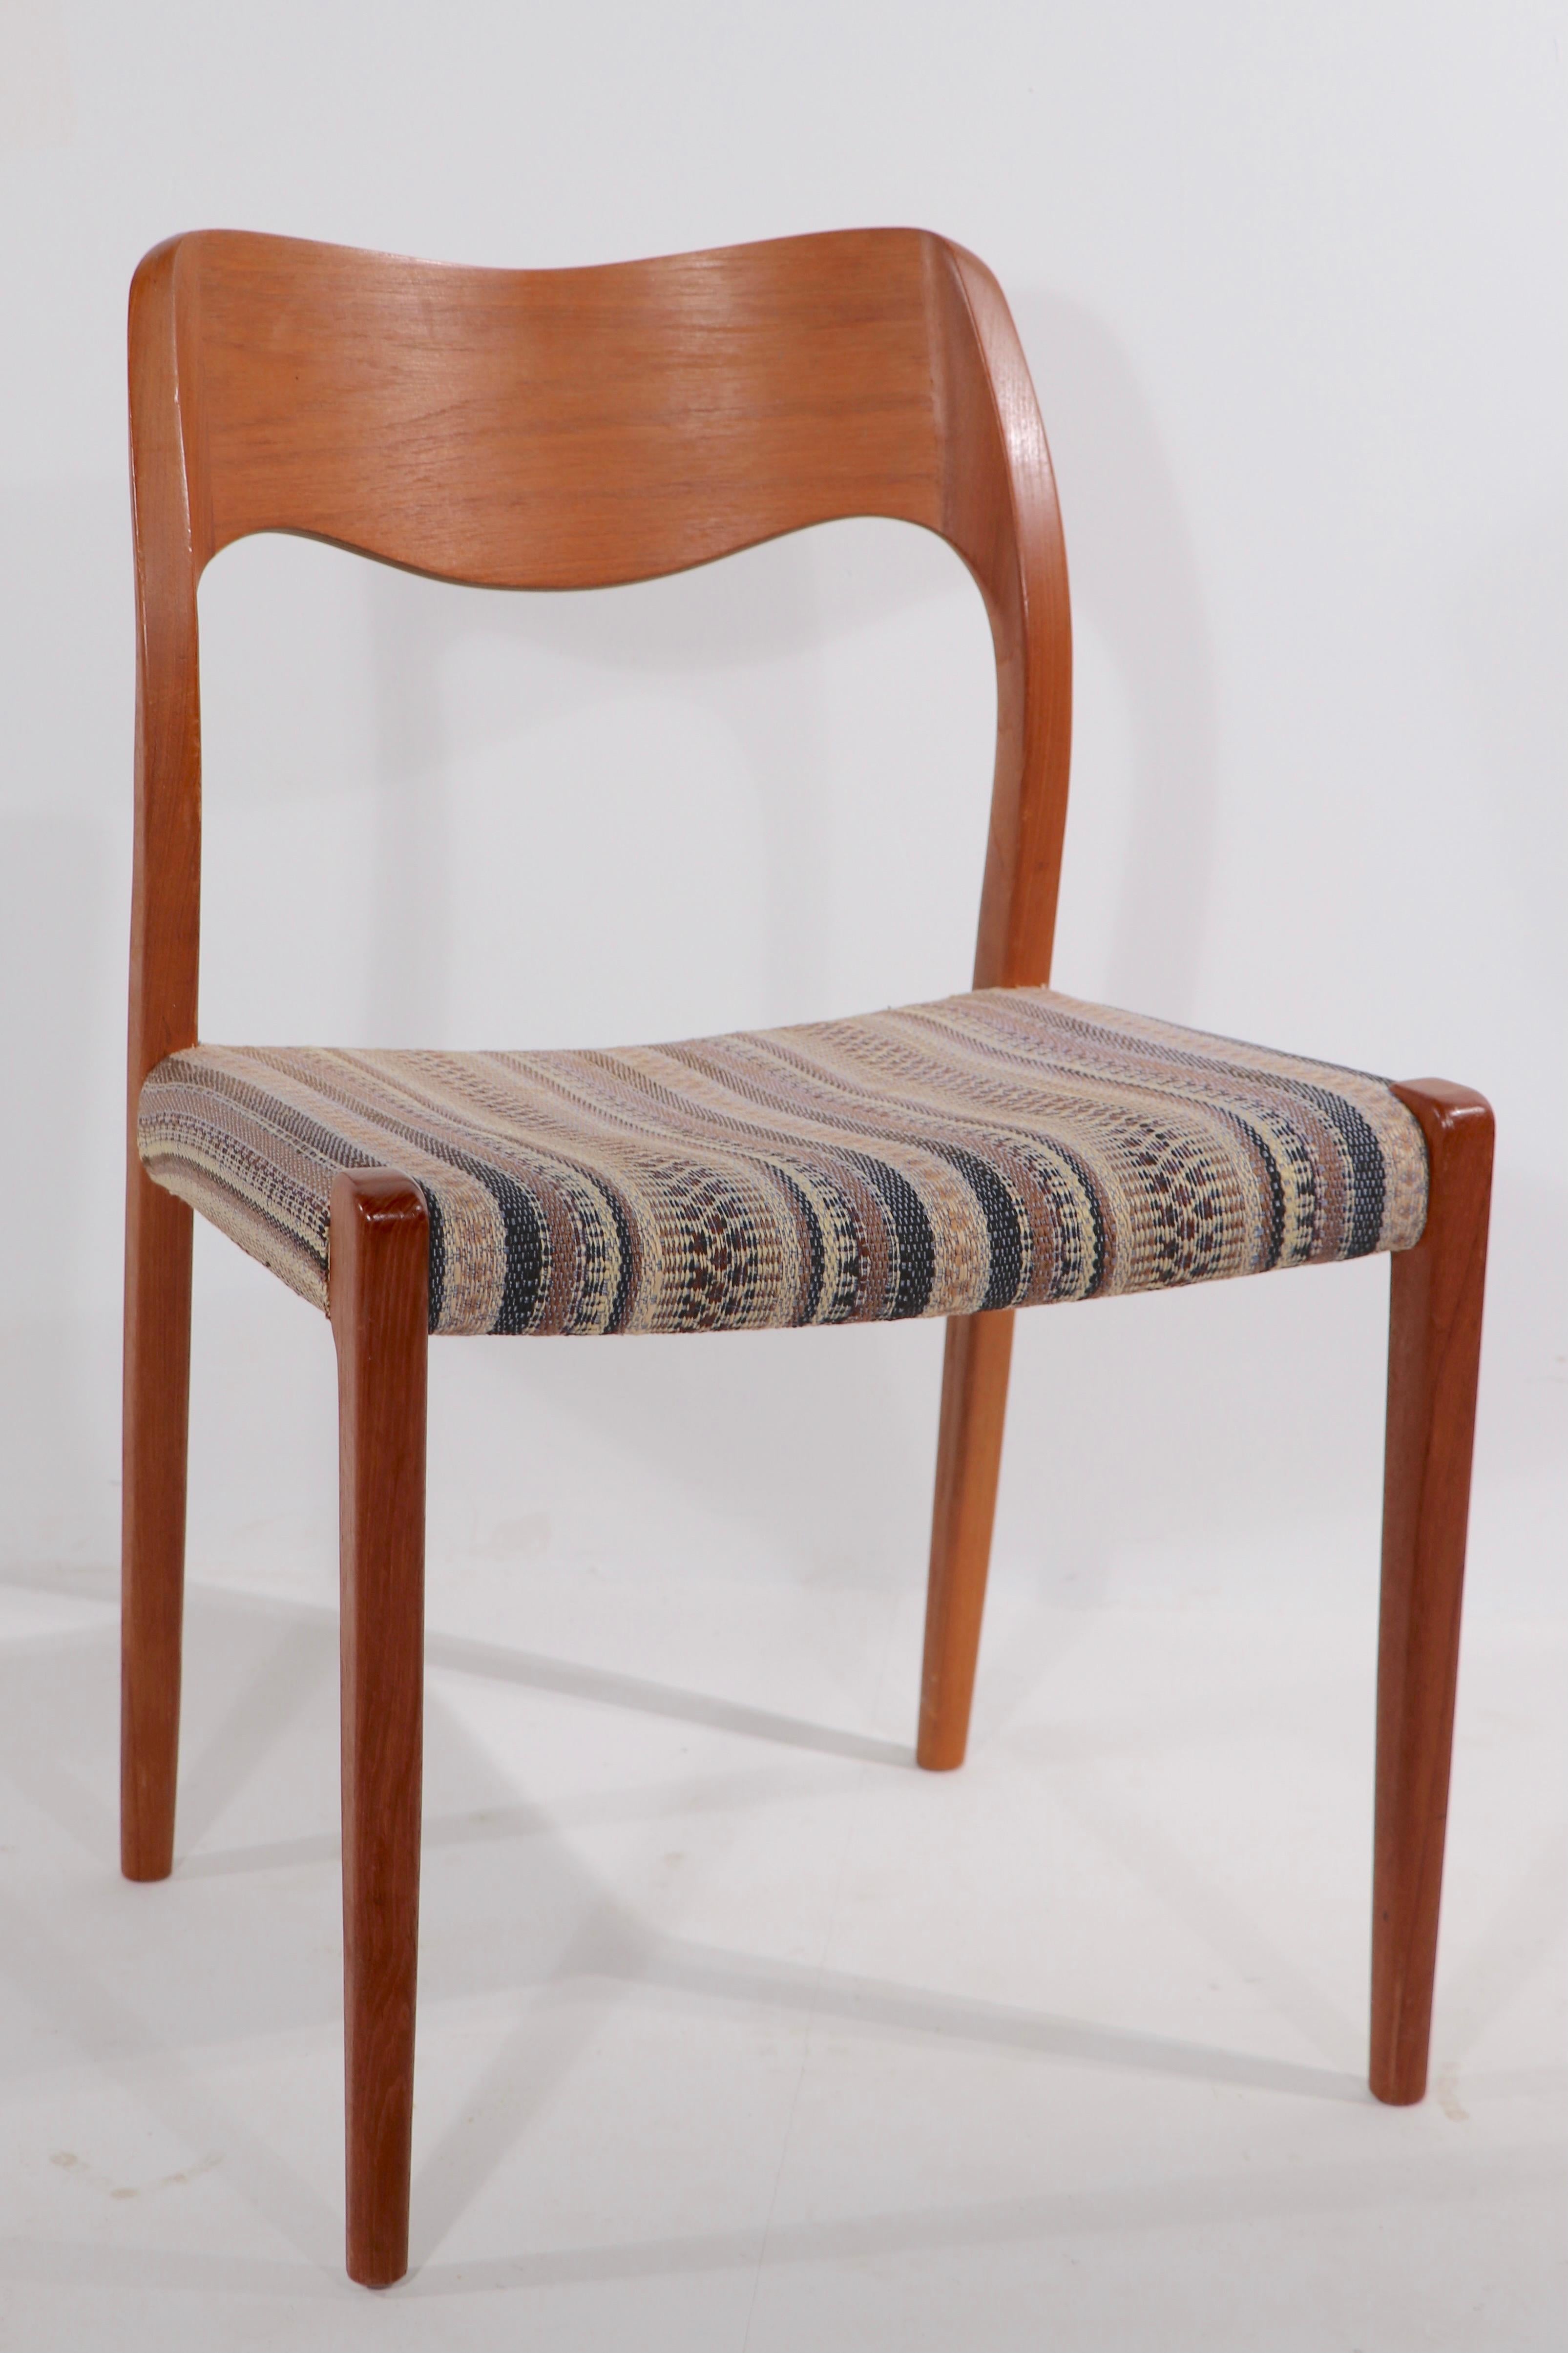 Original clean set of Niels Moller design model 71 dining chairs made by J.L. Mollers. This set is of solid teak, with fabric upholstered seats. All are in very fine, ready to use condition, one seat has inconsequential wear to the fabric - please